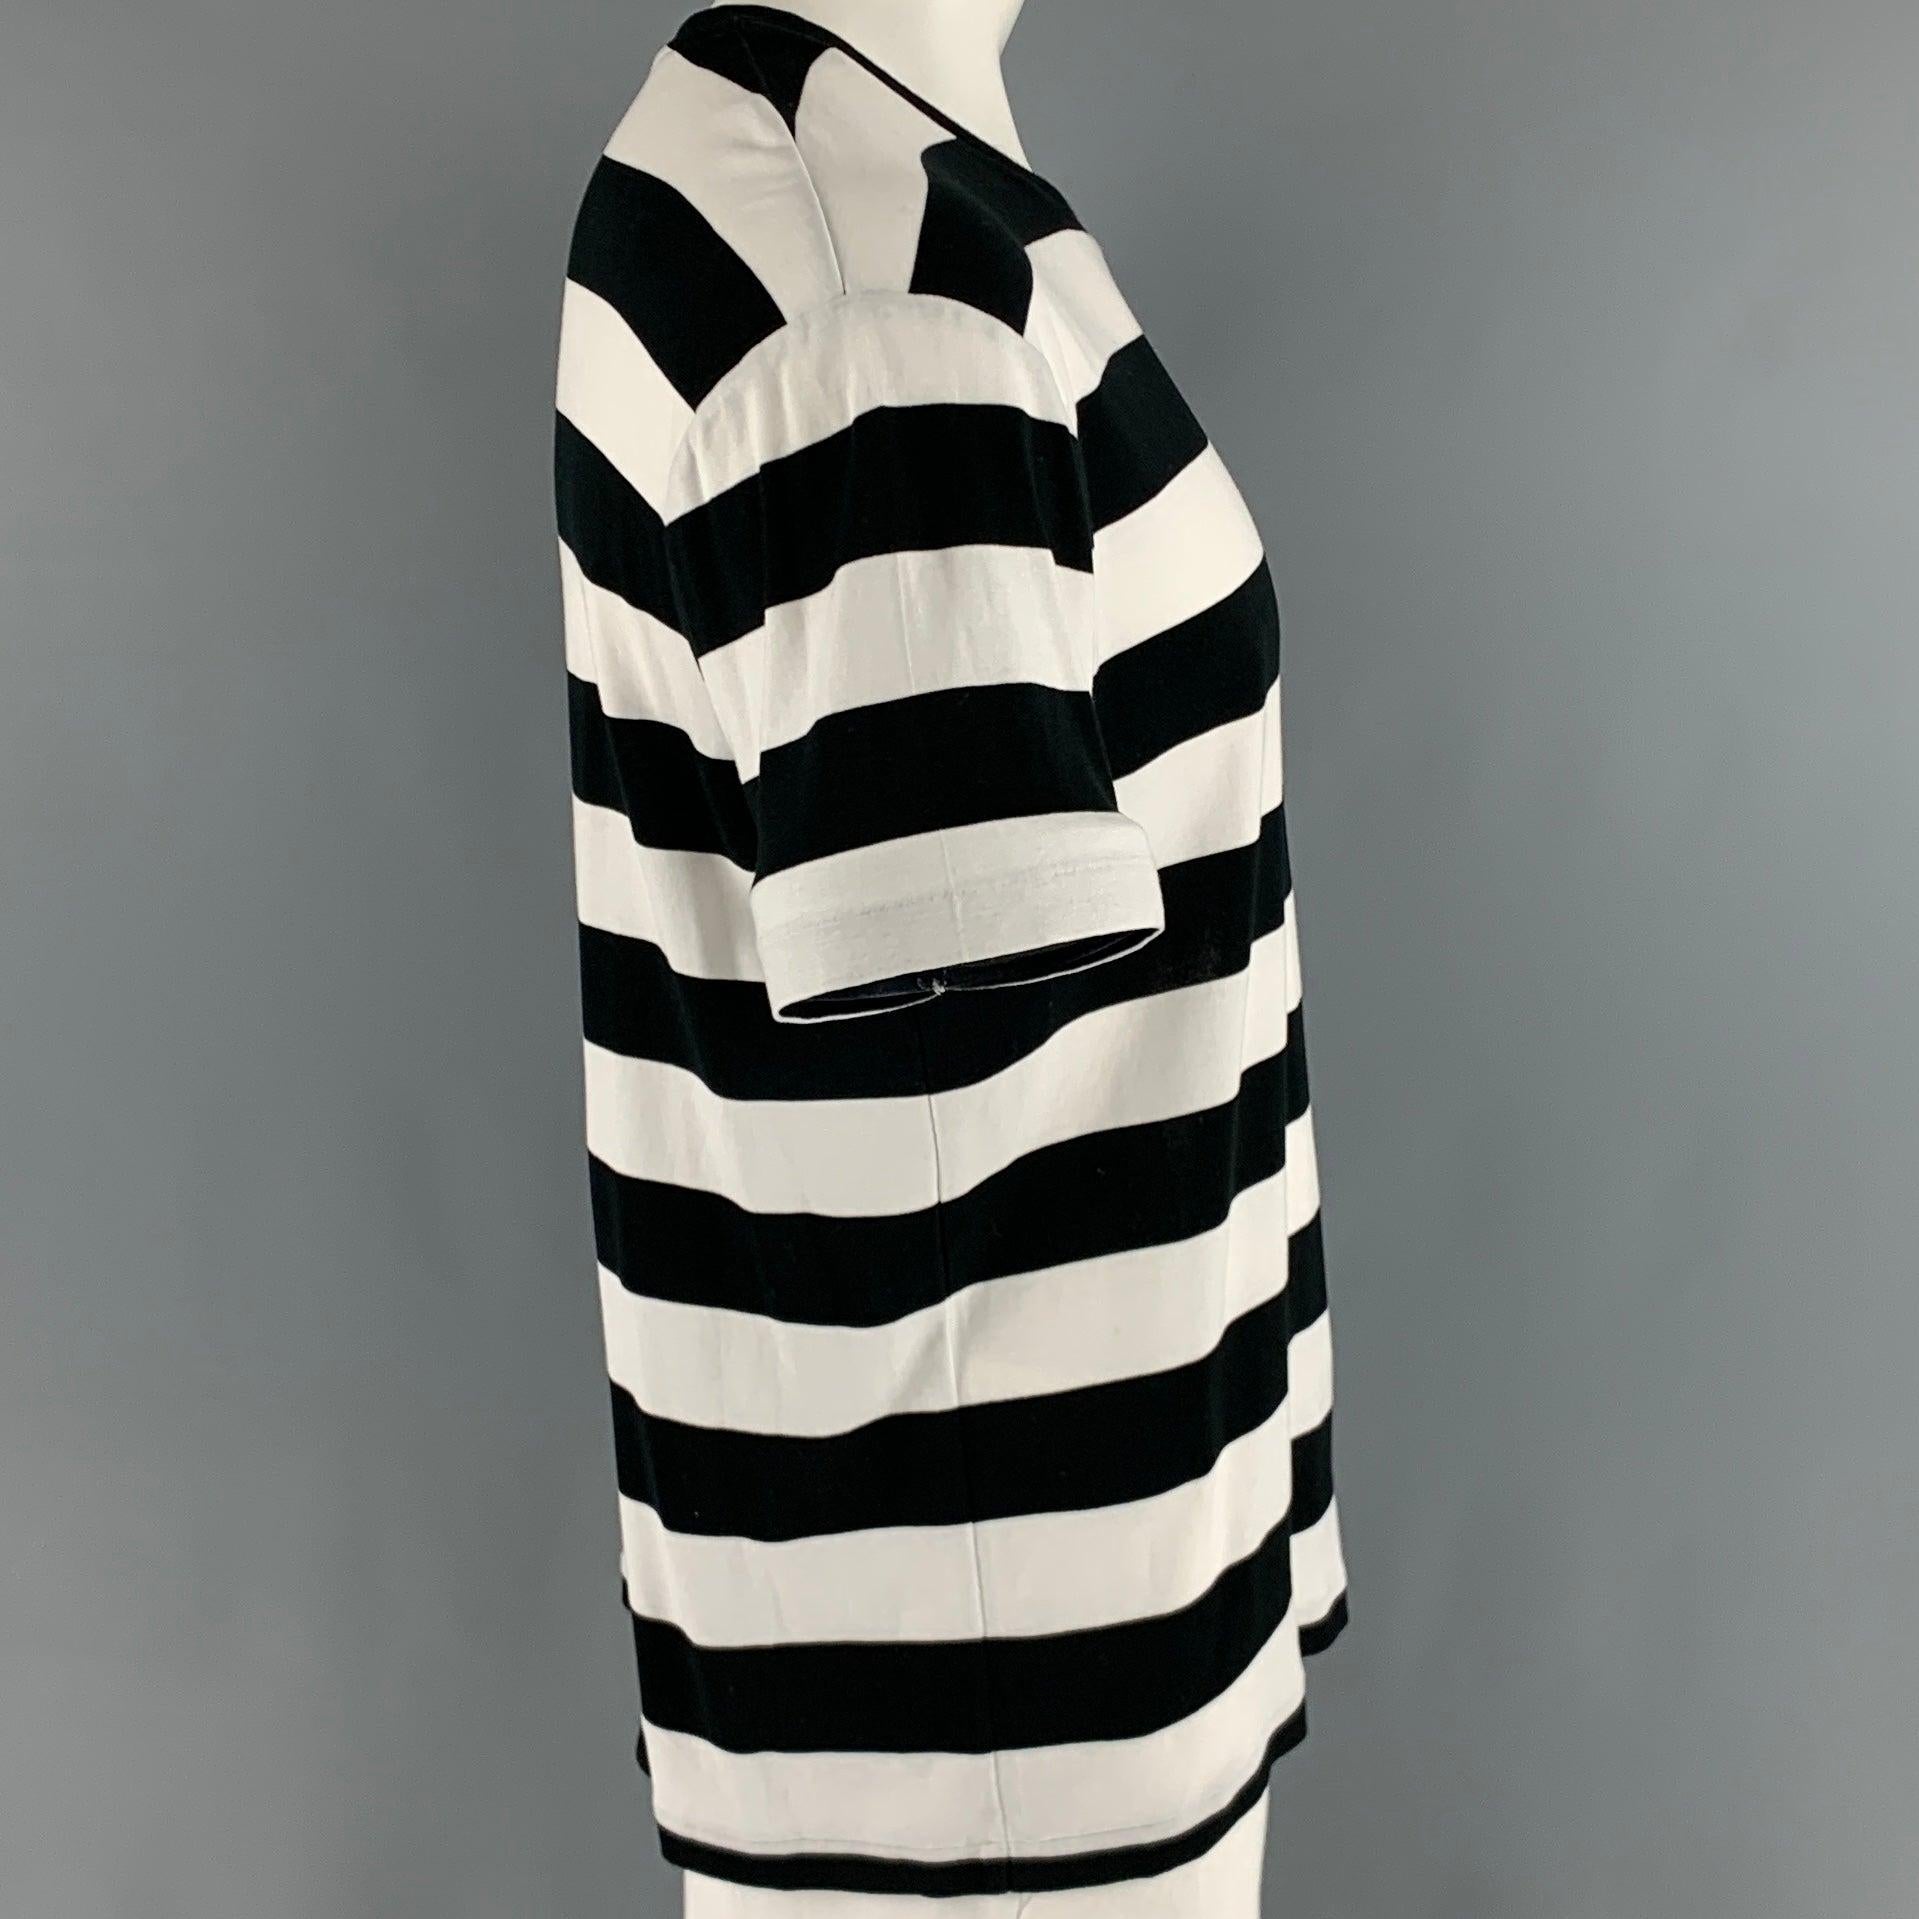 RALPH LAUREN BLACK LABEL t-shirt
in a black and white cotton fabric featuring bold stripe pattern, and crew neck.Very Good Pre-Owned Condition. Minor mark. 

Marked:   XL 

Measurements: 
 
Shoulder: 22.5 inches Chest: 48 inches Sleeve: 8.5 inches